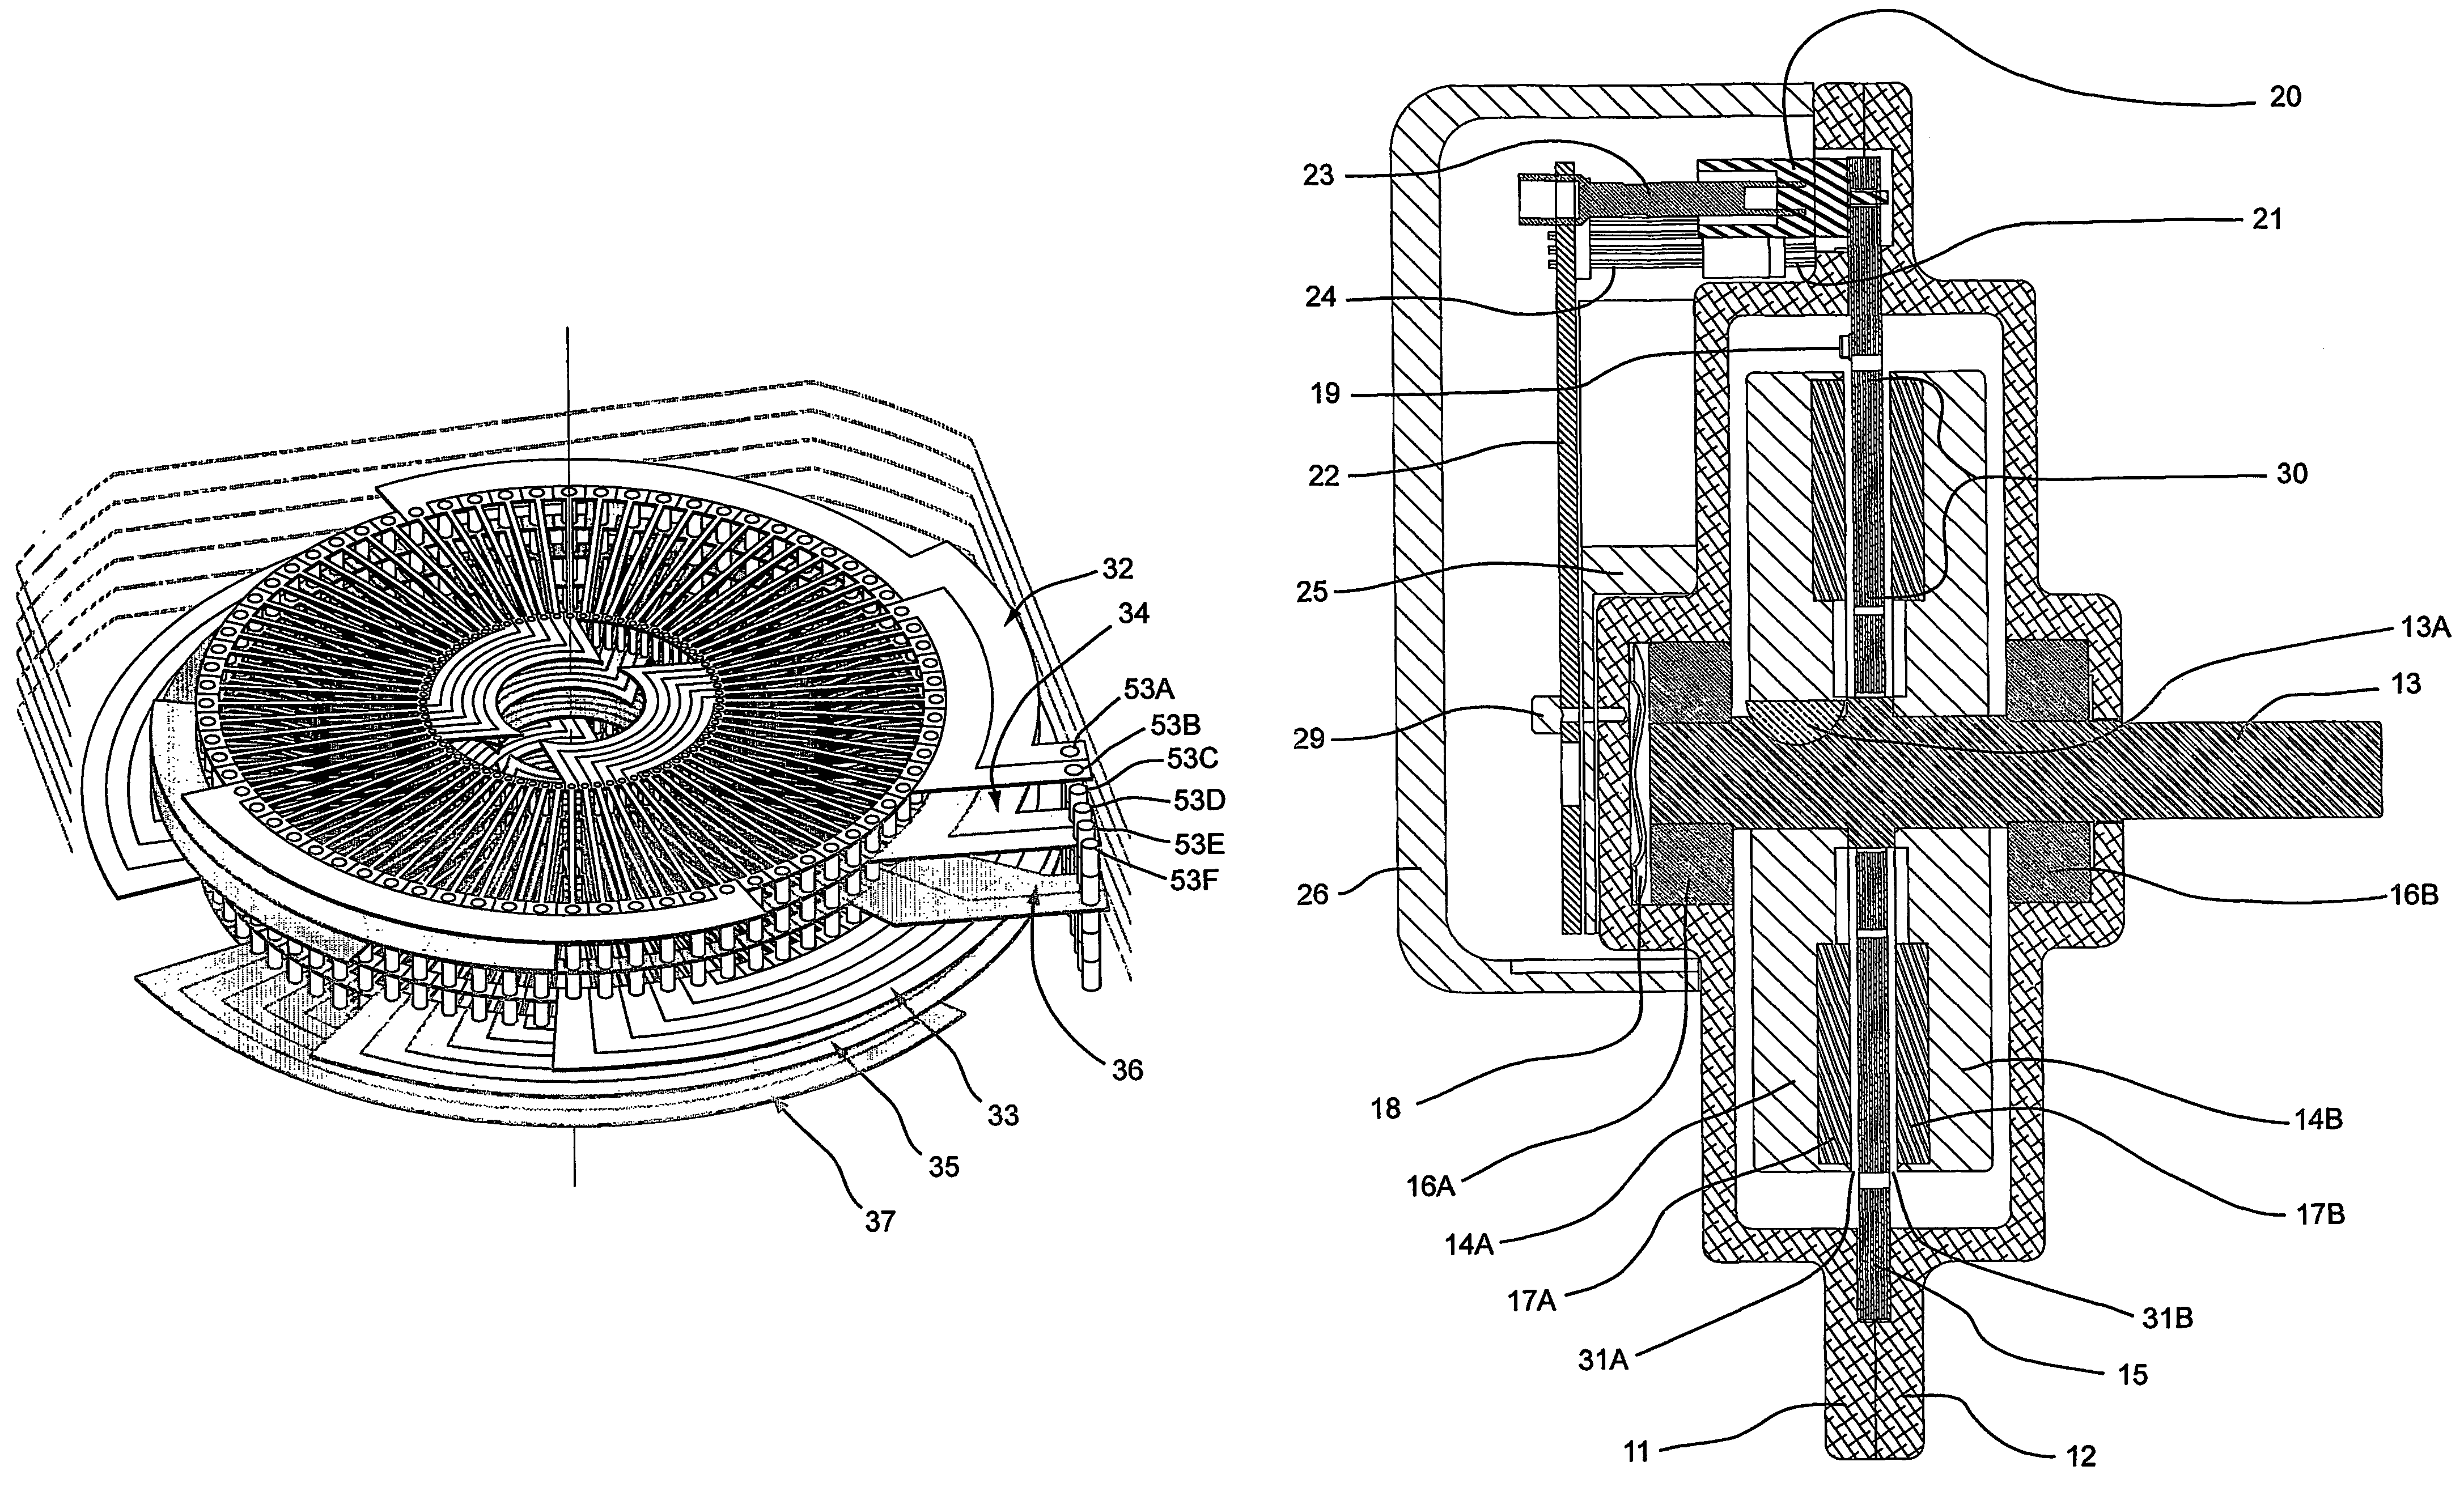 Conductor optimized axial field rotary energy device